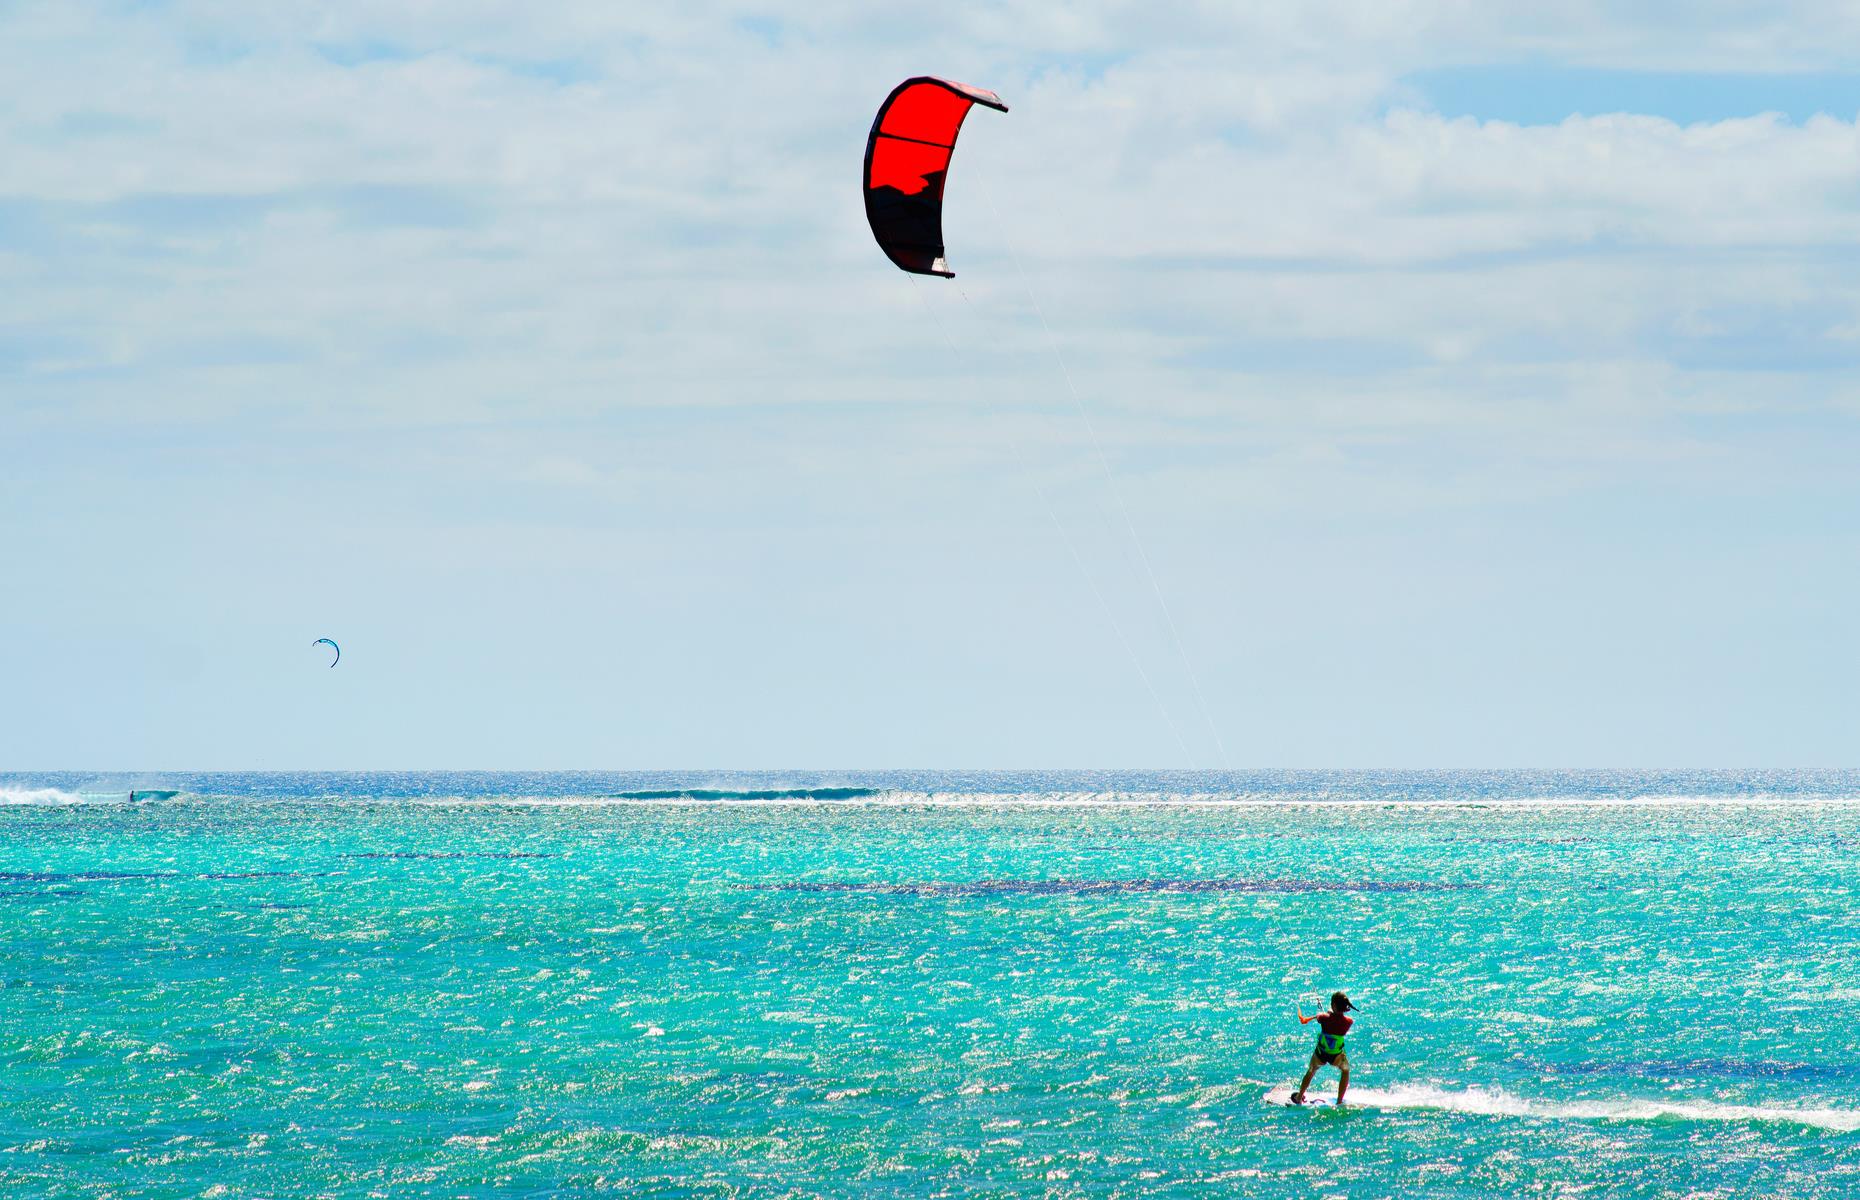 <p>Le Morne Lagoon on the south-west tip of the stunning island of Mauritius is a world-famous kitesurfing spot. Its shallow waters and sandy bottom make it ideal for families wanting to master the extreme sport together. Stay at nearby laidback luxury resort LUX Le Morne, where younger ones can enjoy the brilliant kids' club while you get to grips with this thrilling activity with the older family members.</p>